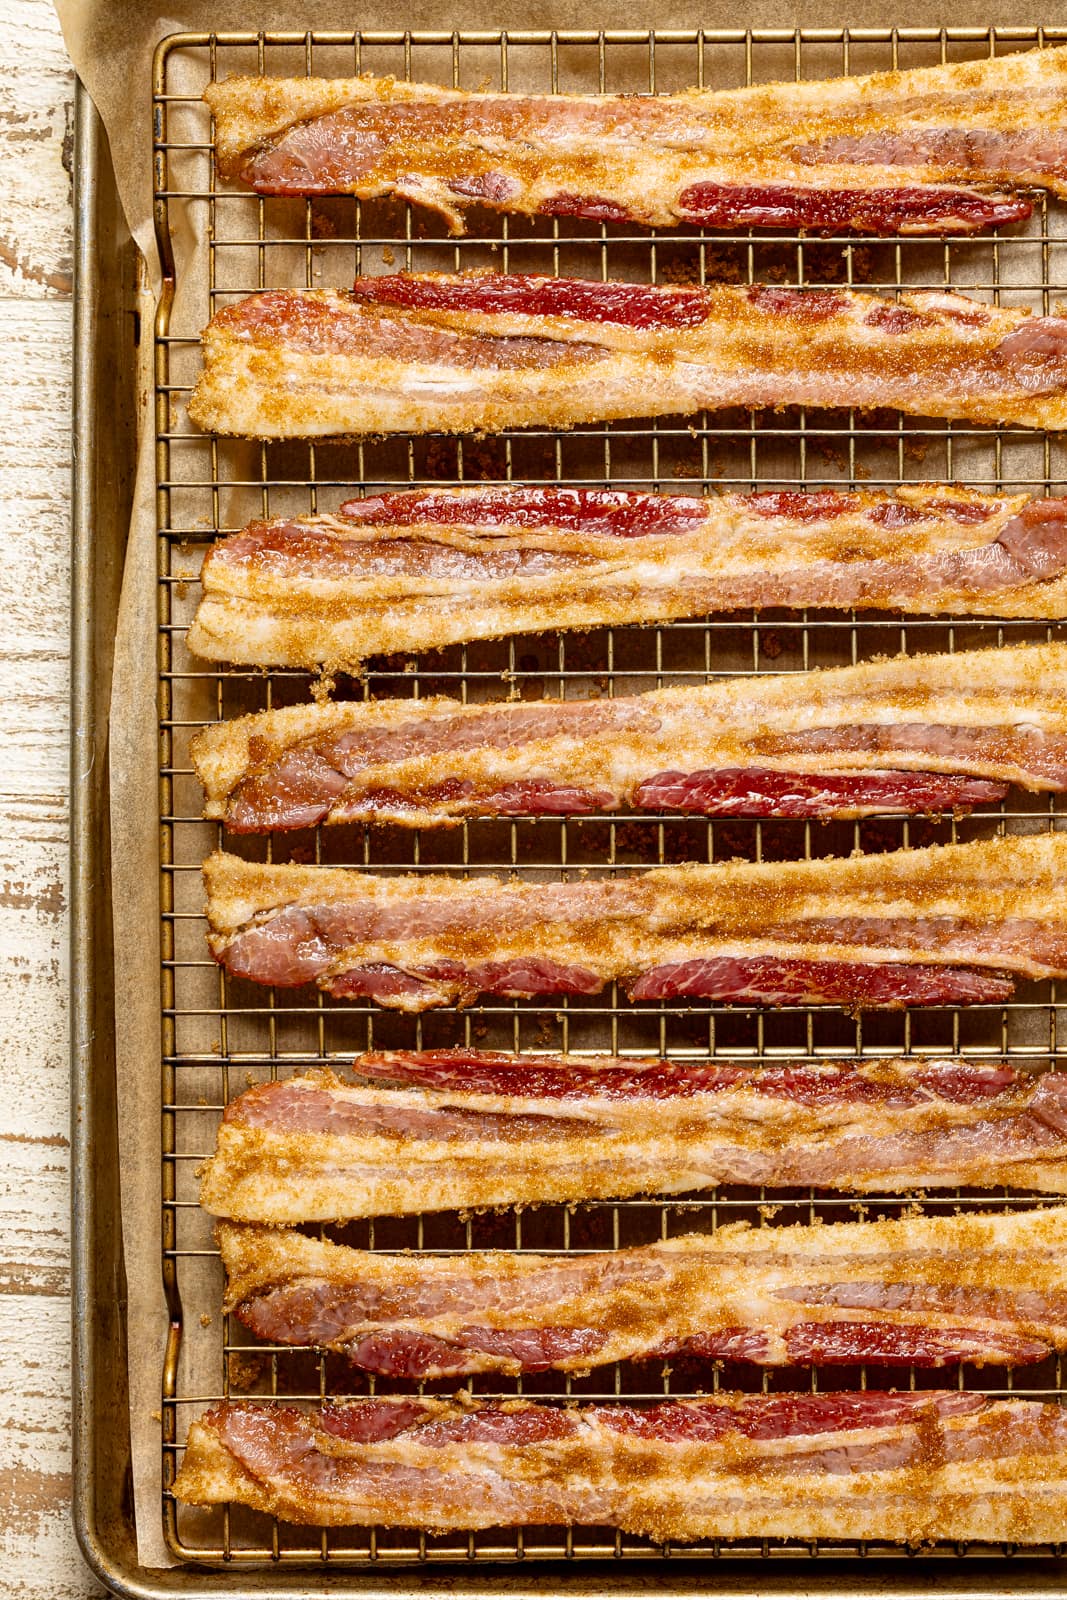 Preparing for the candied bacon recipe. Raw bacon with brown sugar topping on a baking sheet and wire rack.